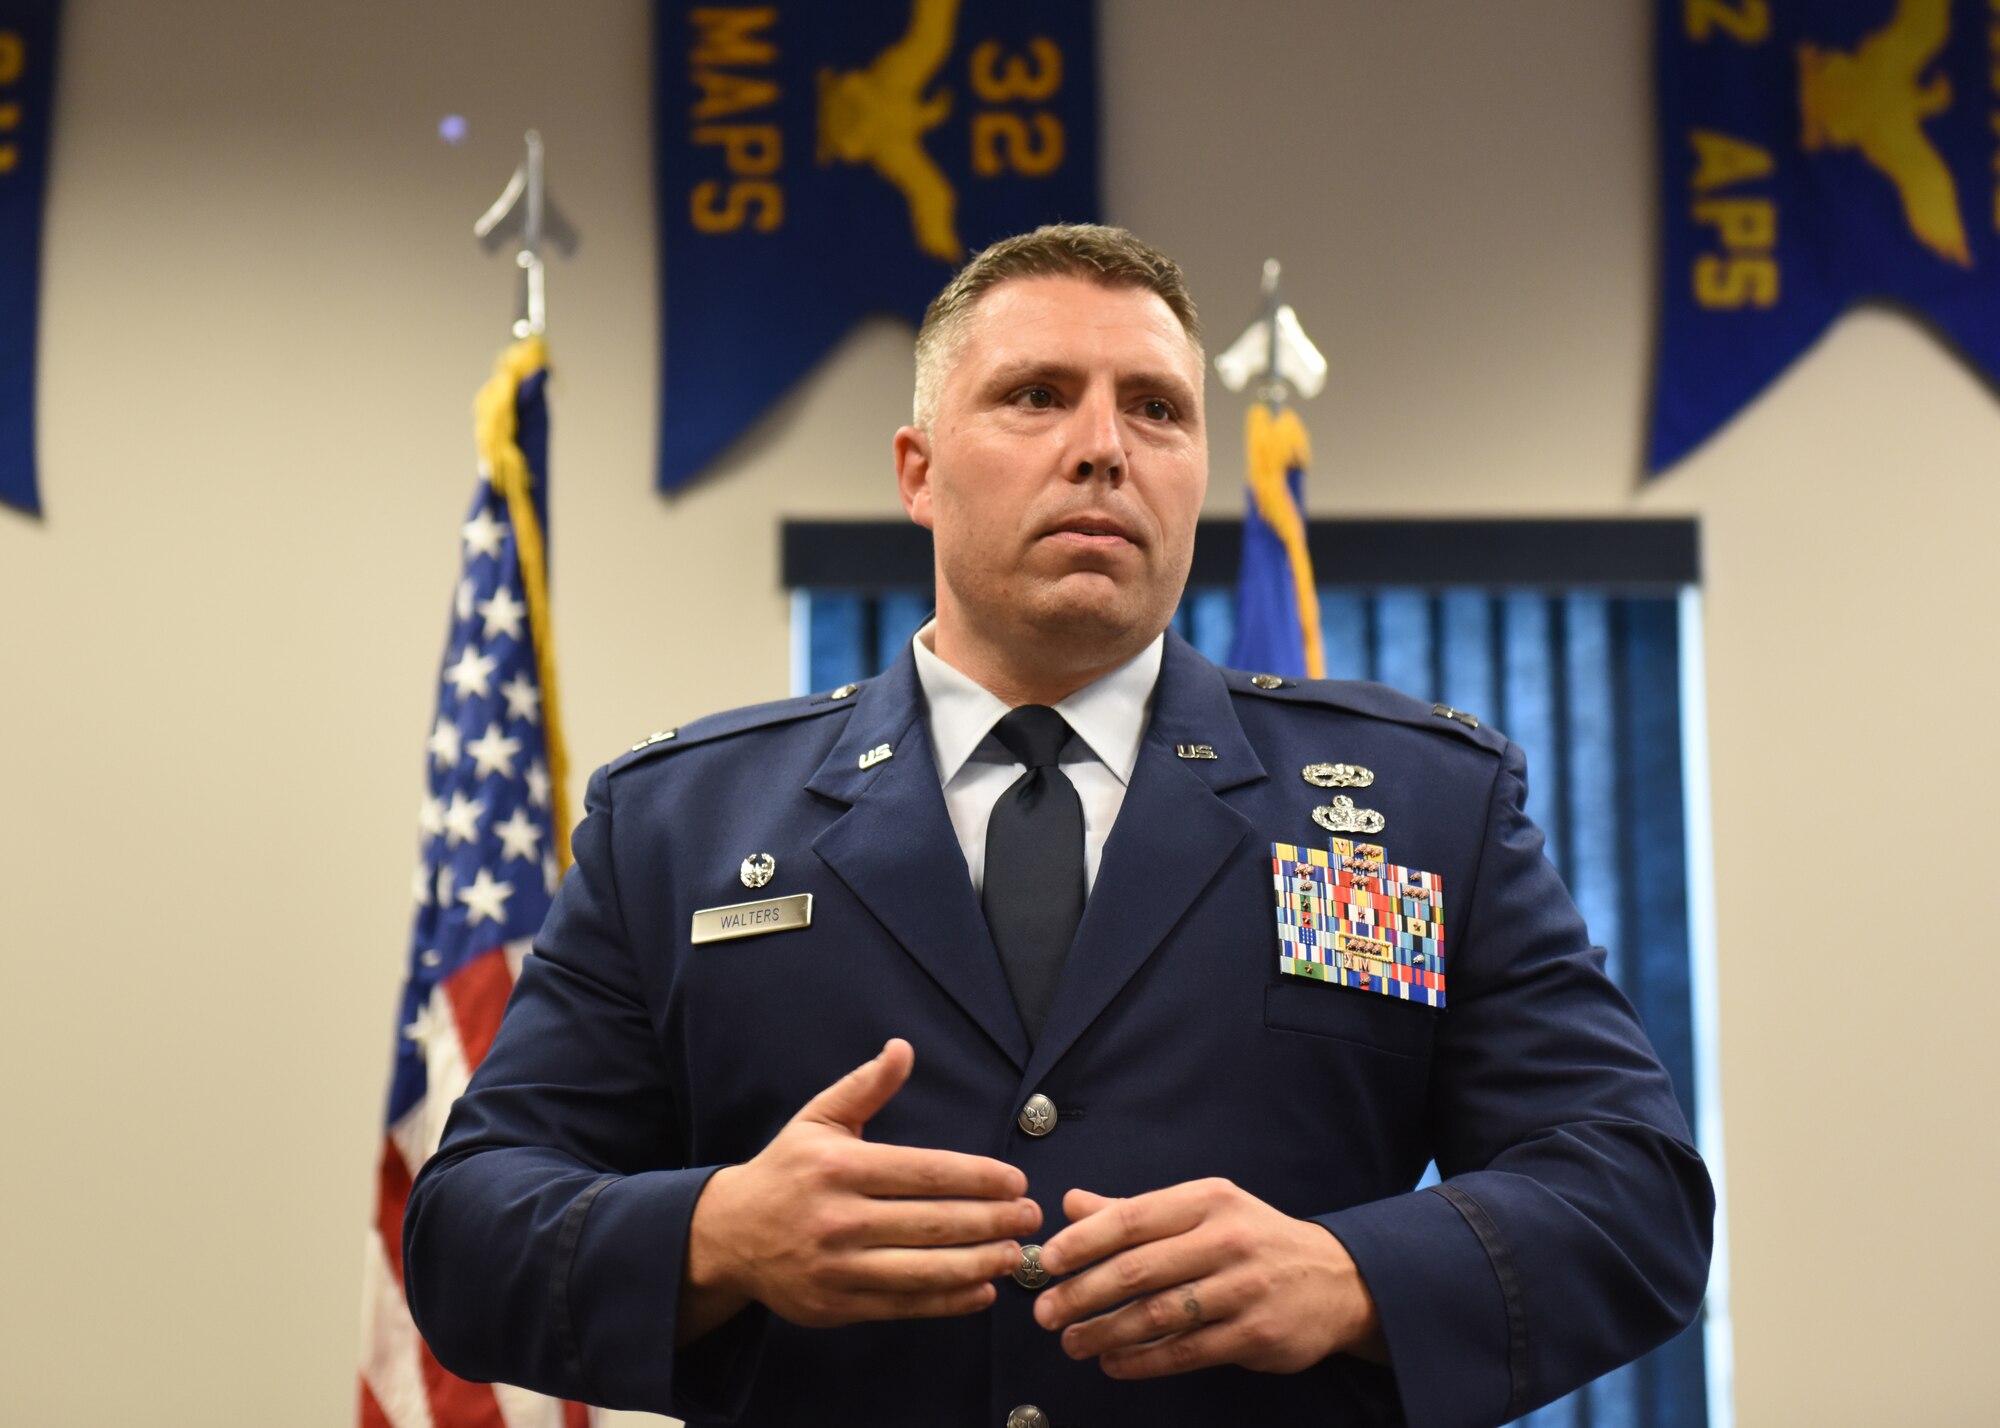 Capt. Joseph E. Walters, commander of the 911th Aircraft Maintenance Squadron, speaks to the 911th AMXS Airmen at his assumption of command ceremony at the Pittsburgh International Airport Air Reserve Station, Pennsylvania Aug. 3, 2019.